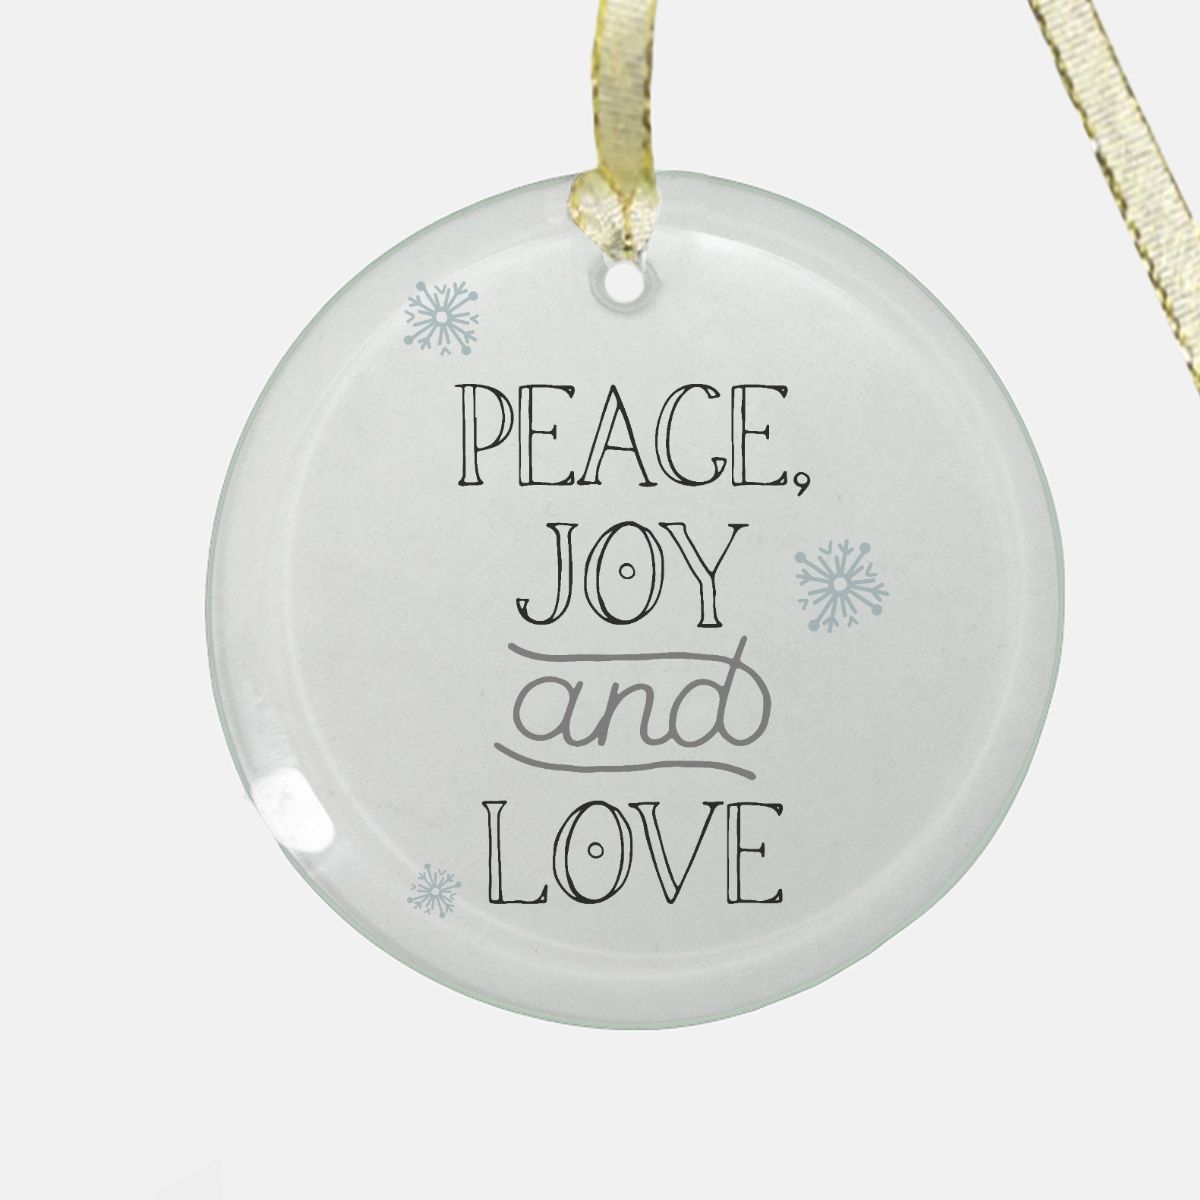 Round Clear Glass Holiday Ornament - Peace, Joy & Love